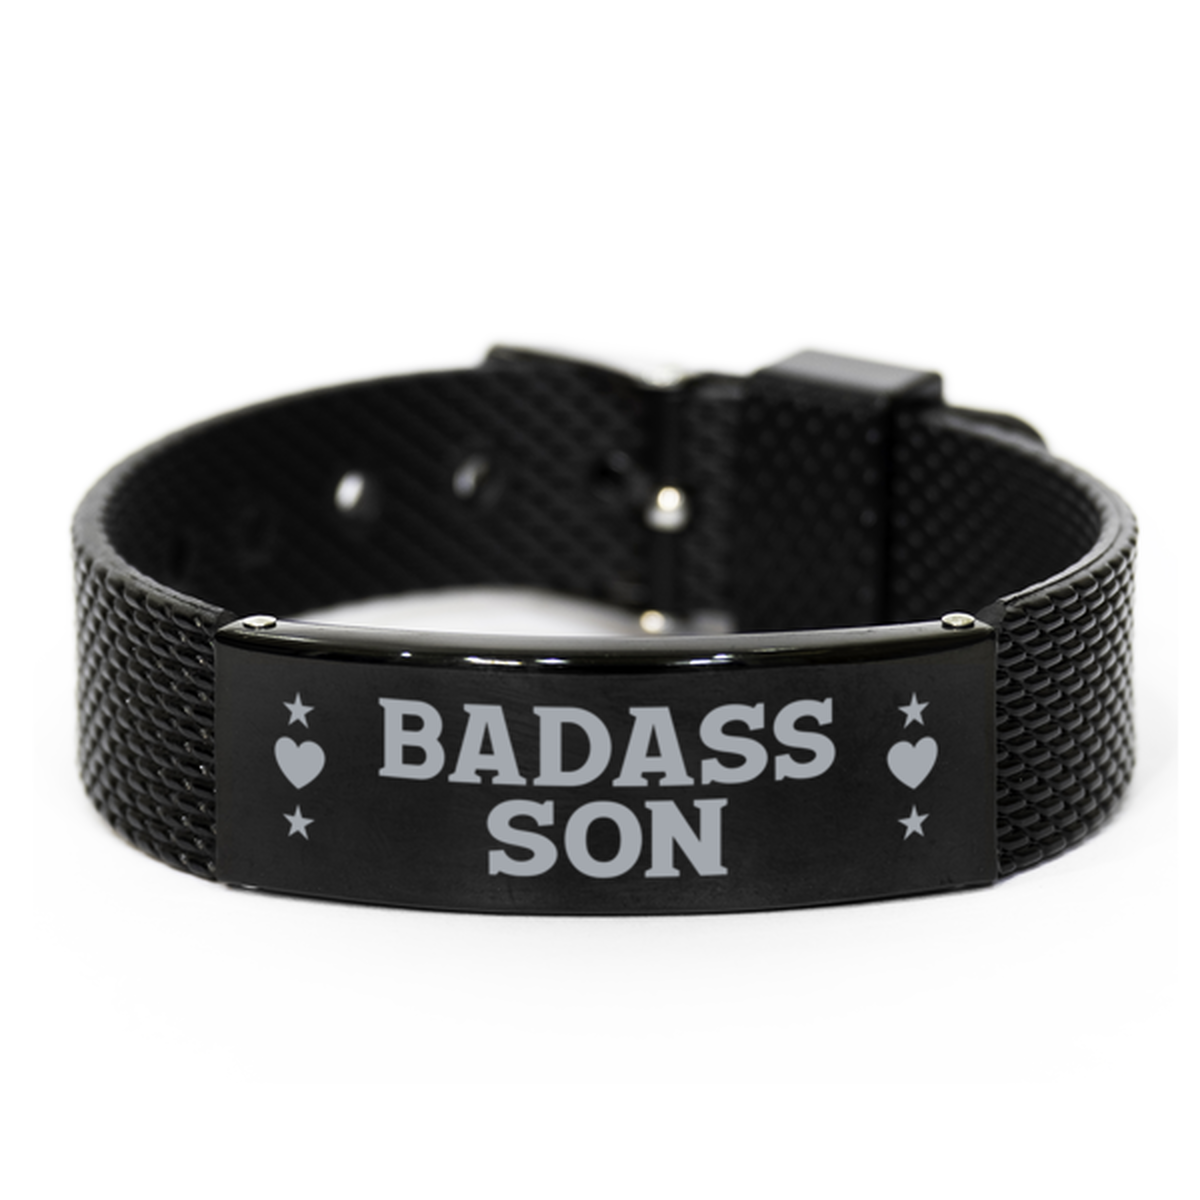 Son Black Shark Mesh Bracelet, Badass Son, Funny Family Gifts For Son From Dad Mom